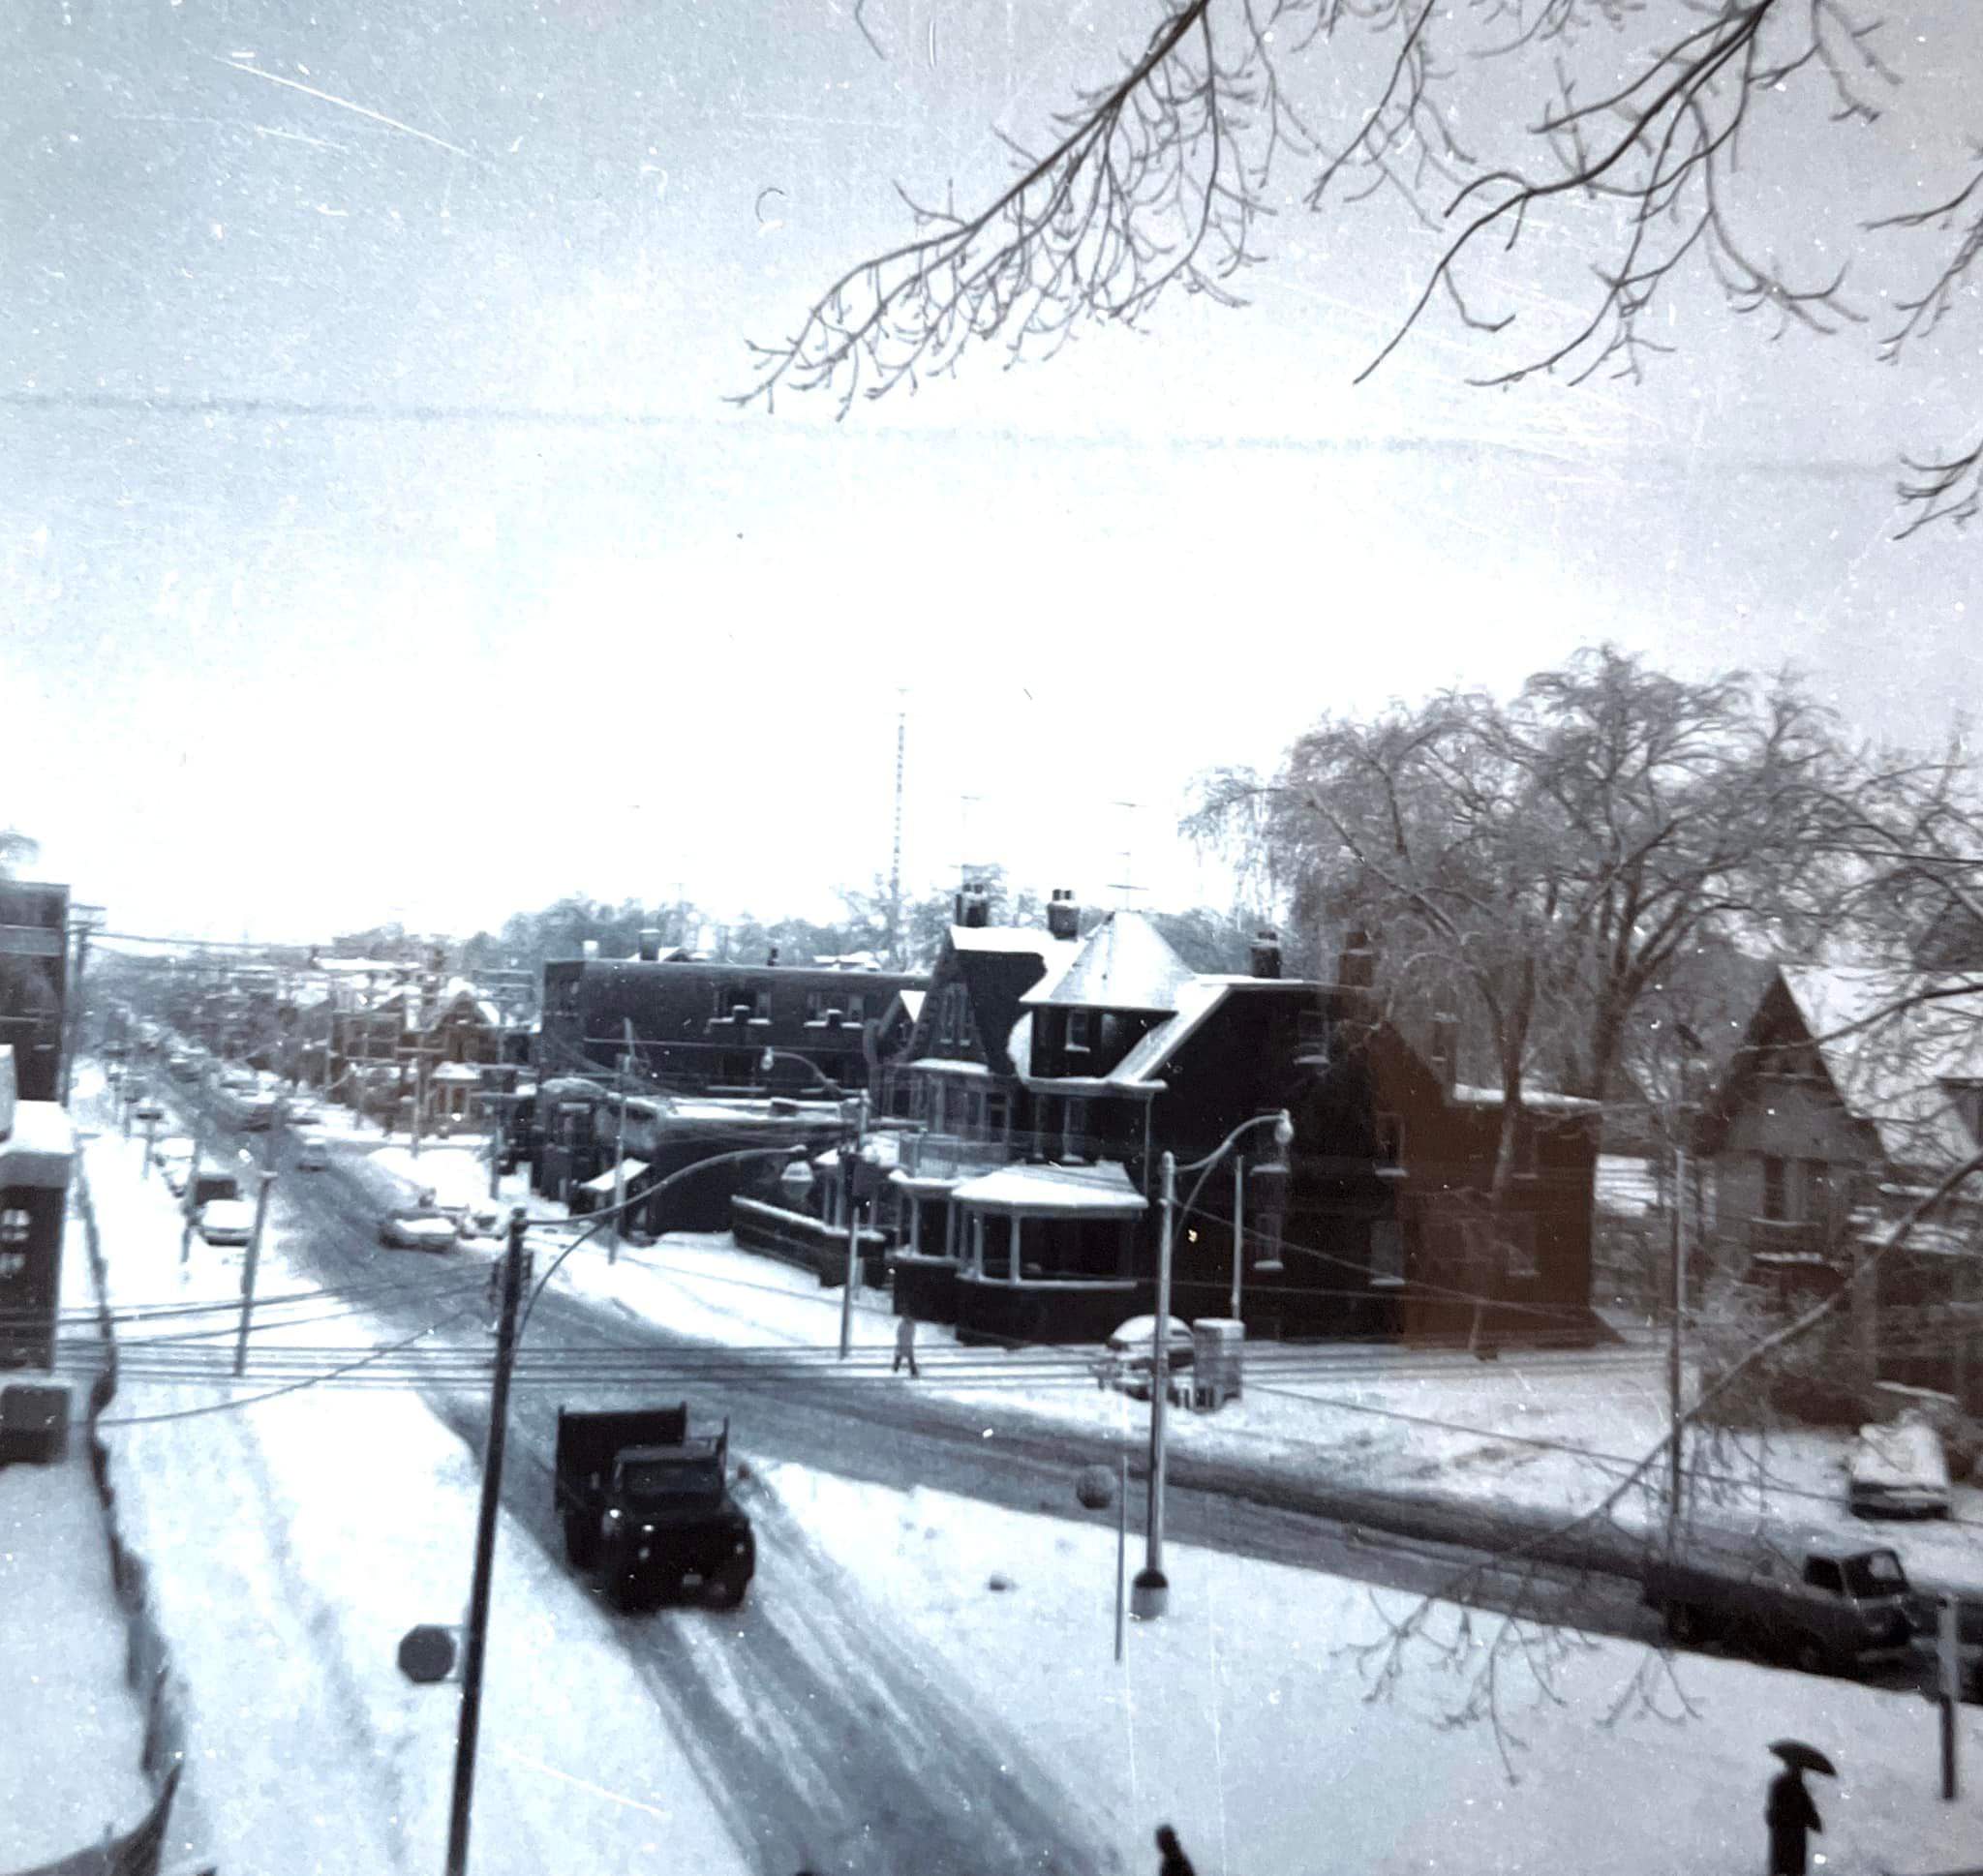 Harbord Street, taken from Whitney Hall residence on St. George Street in the winter of 1963